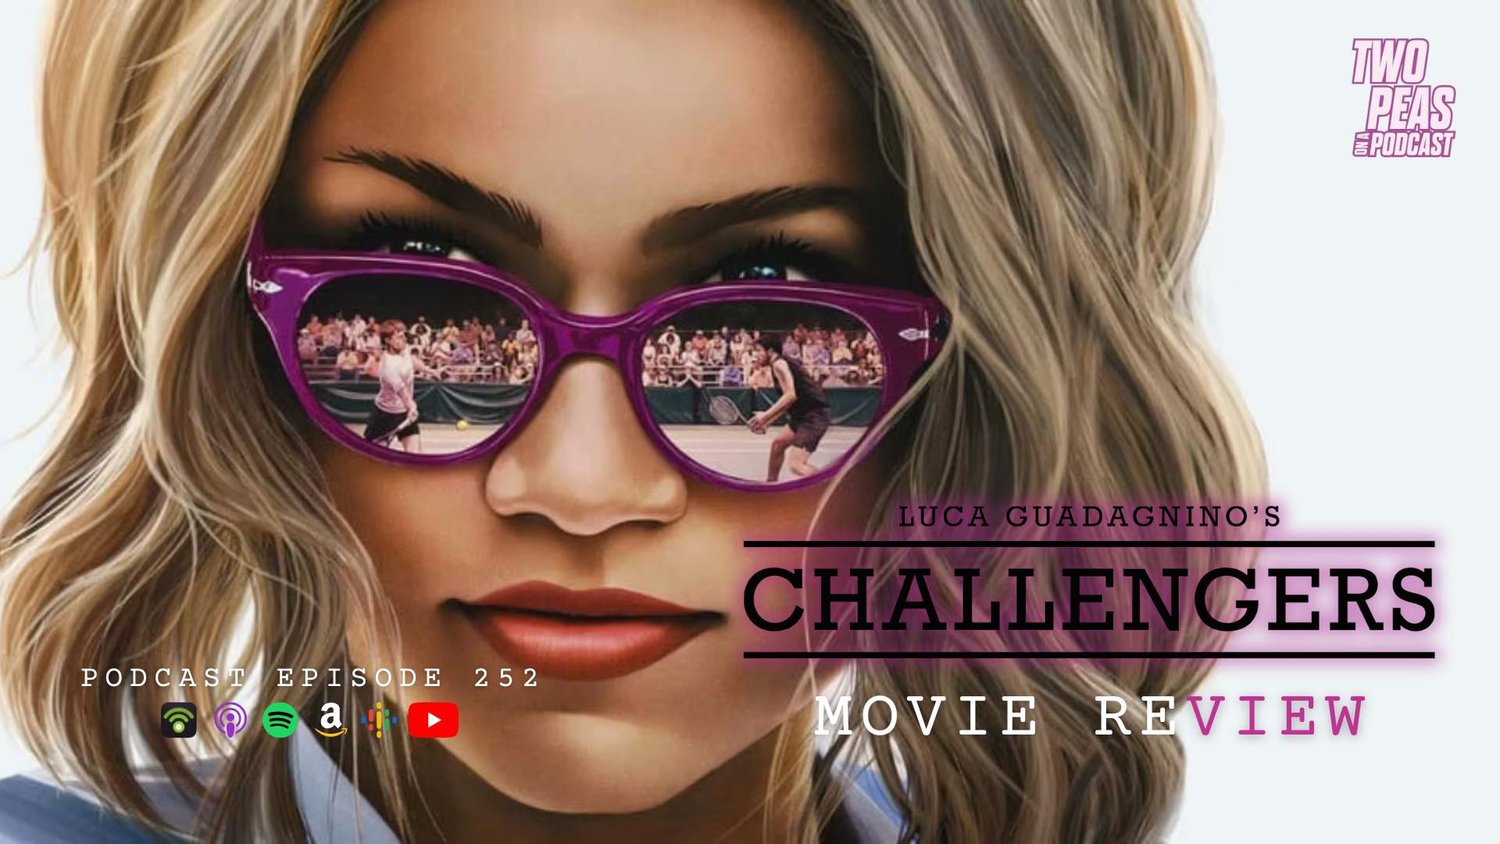 CHALLENGERS Movie Review (252)